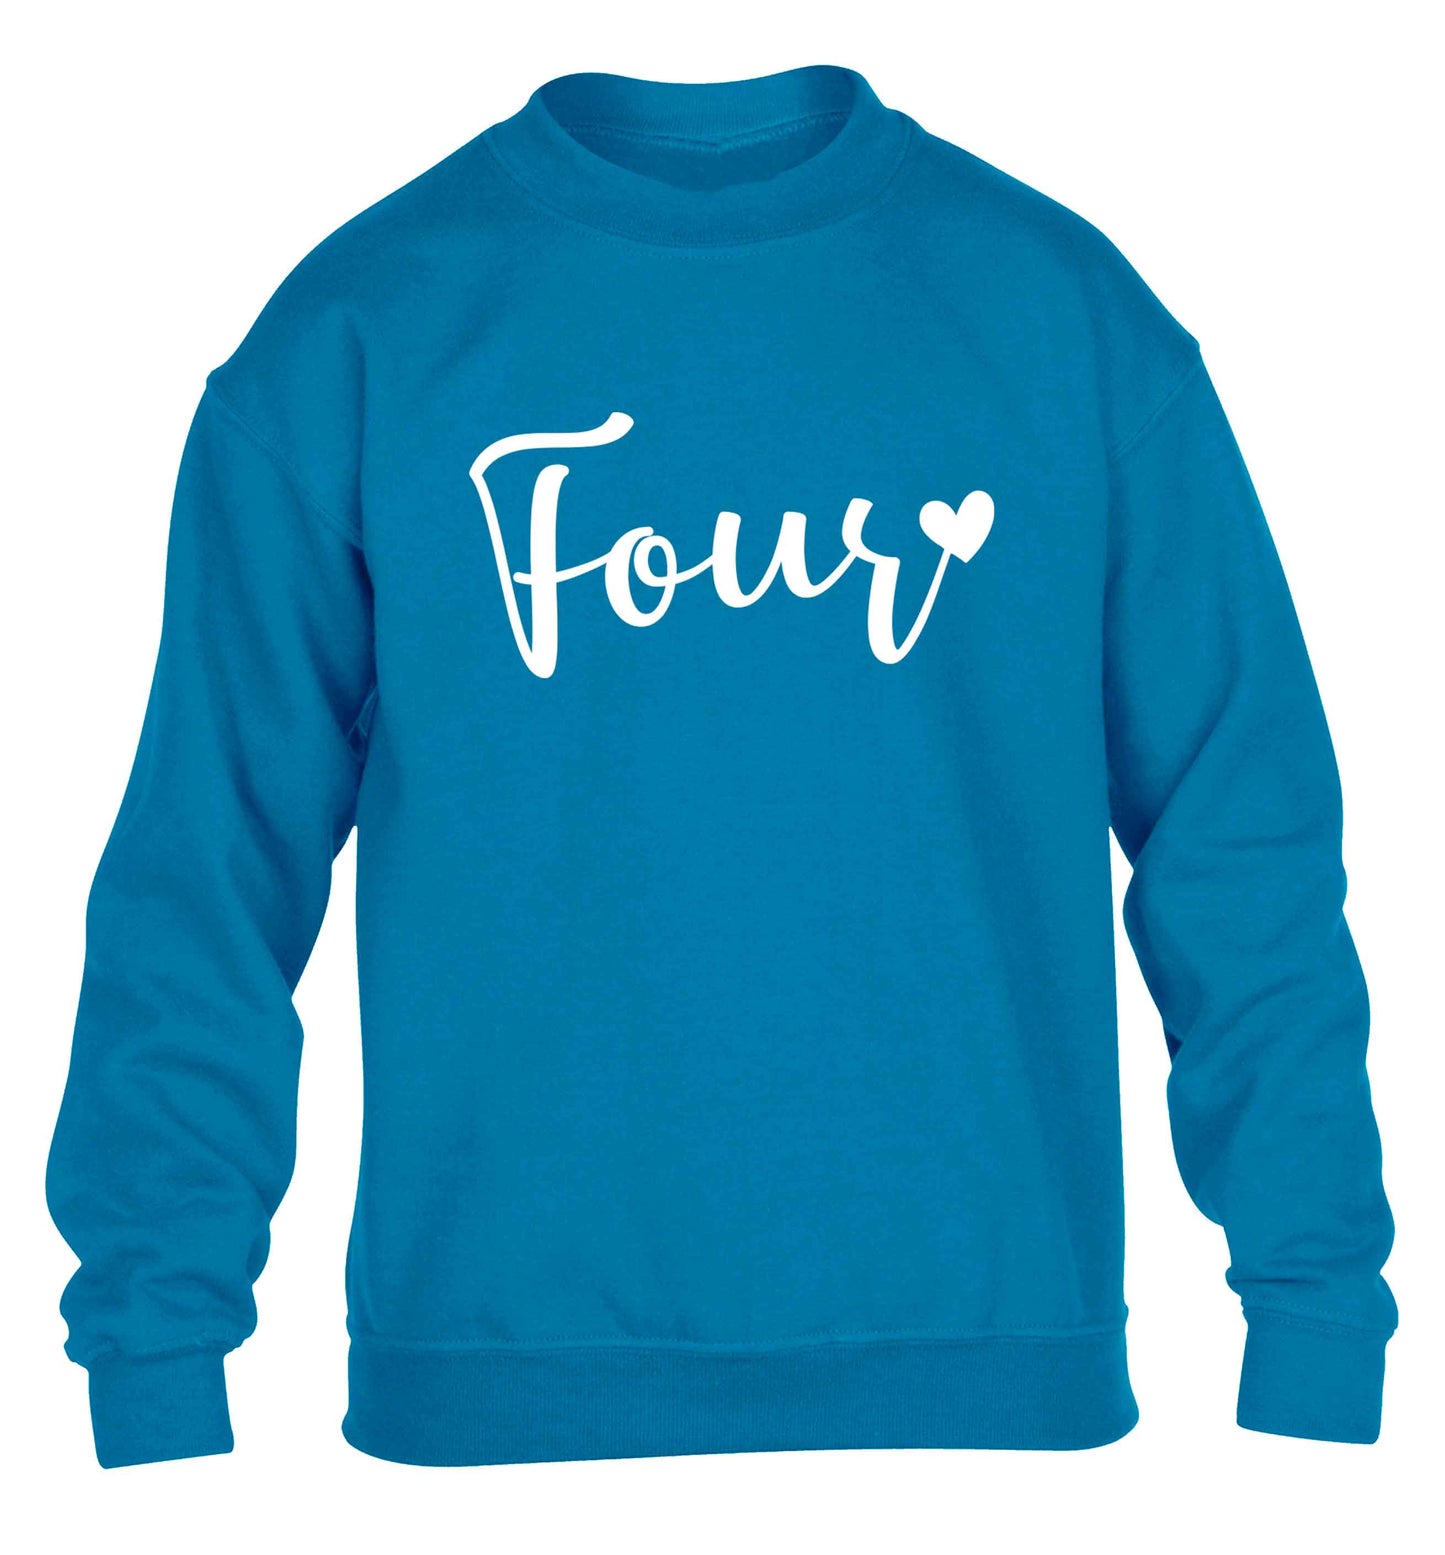 Four and heart children's blue sweater 12-13 Years